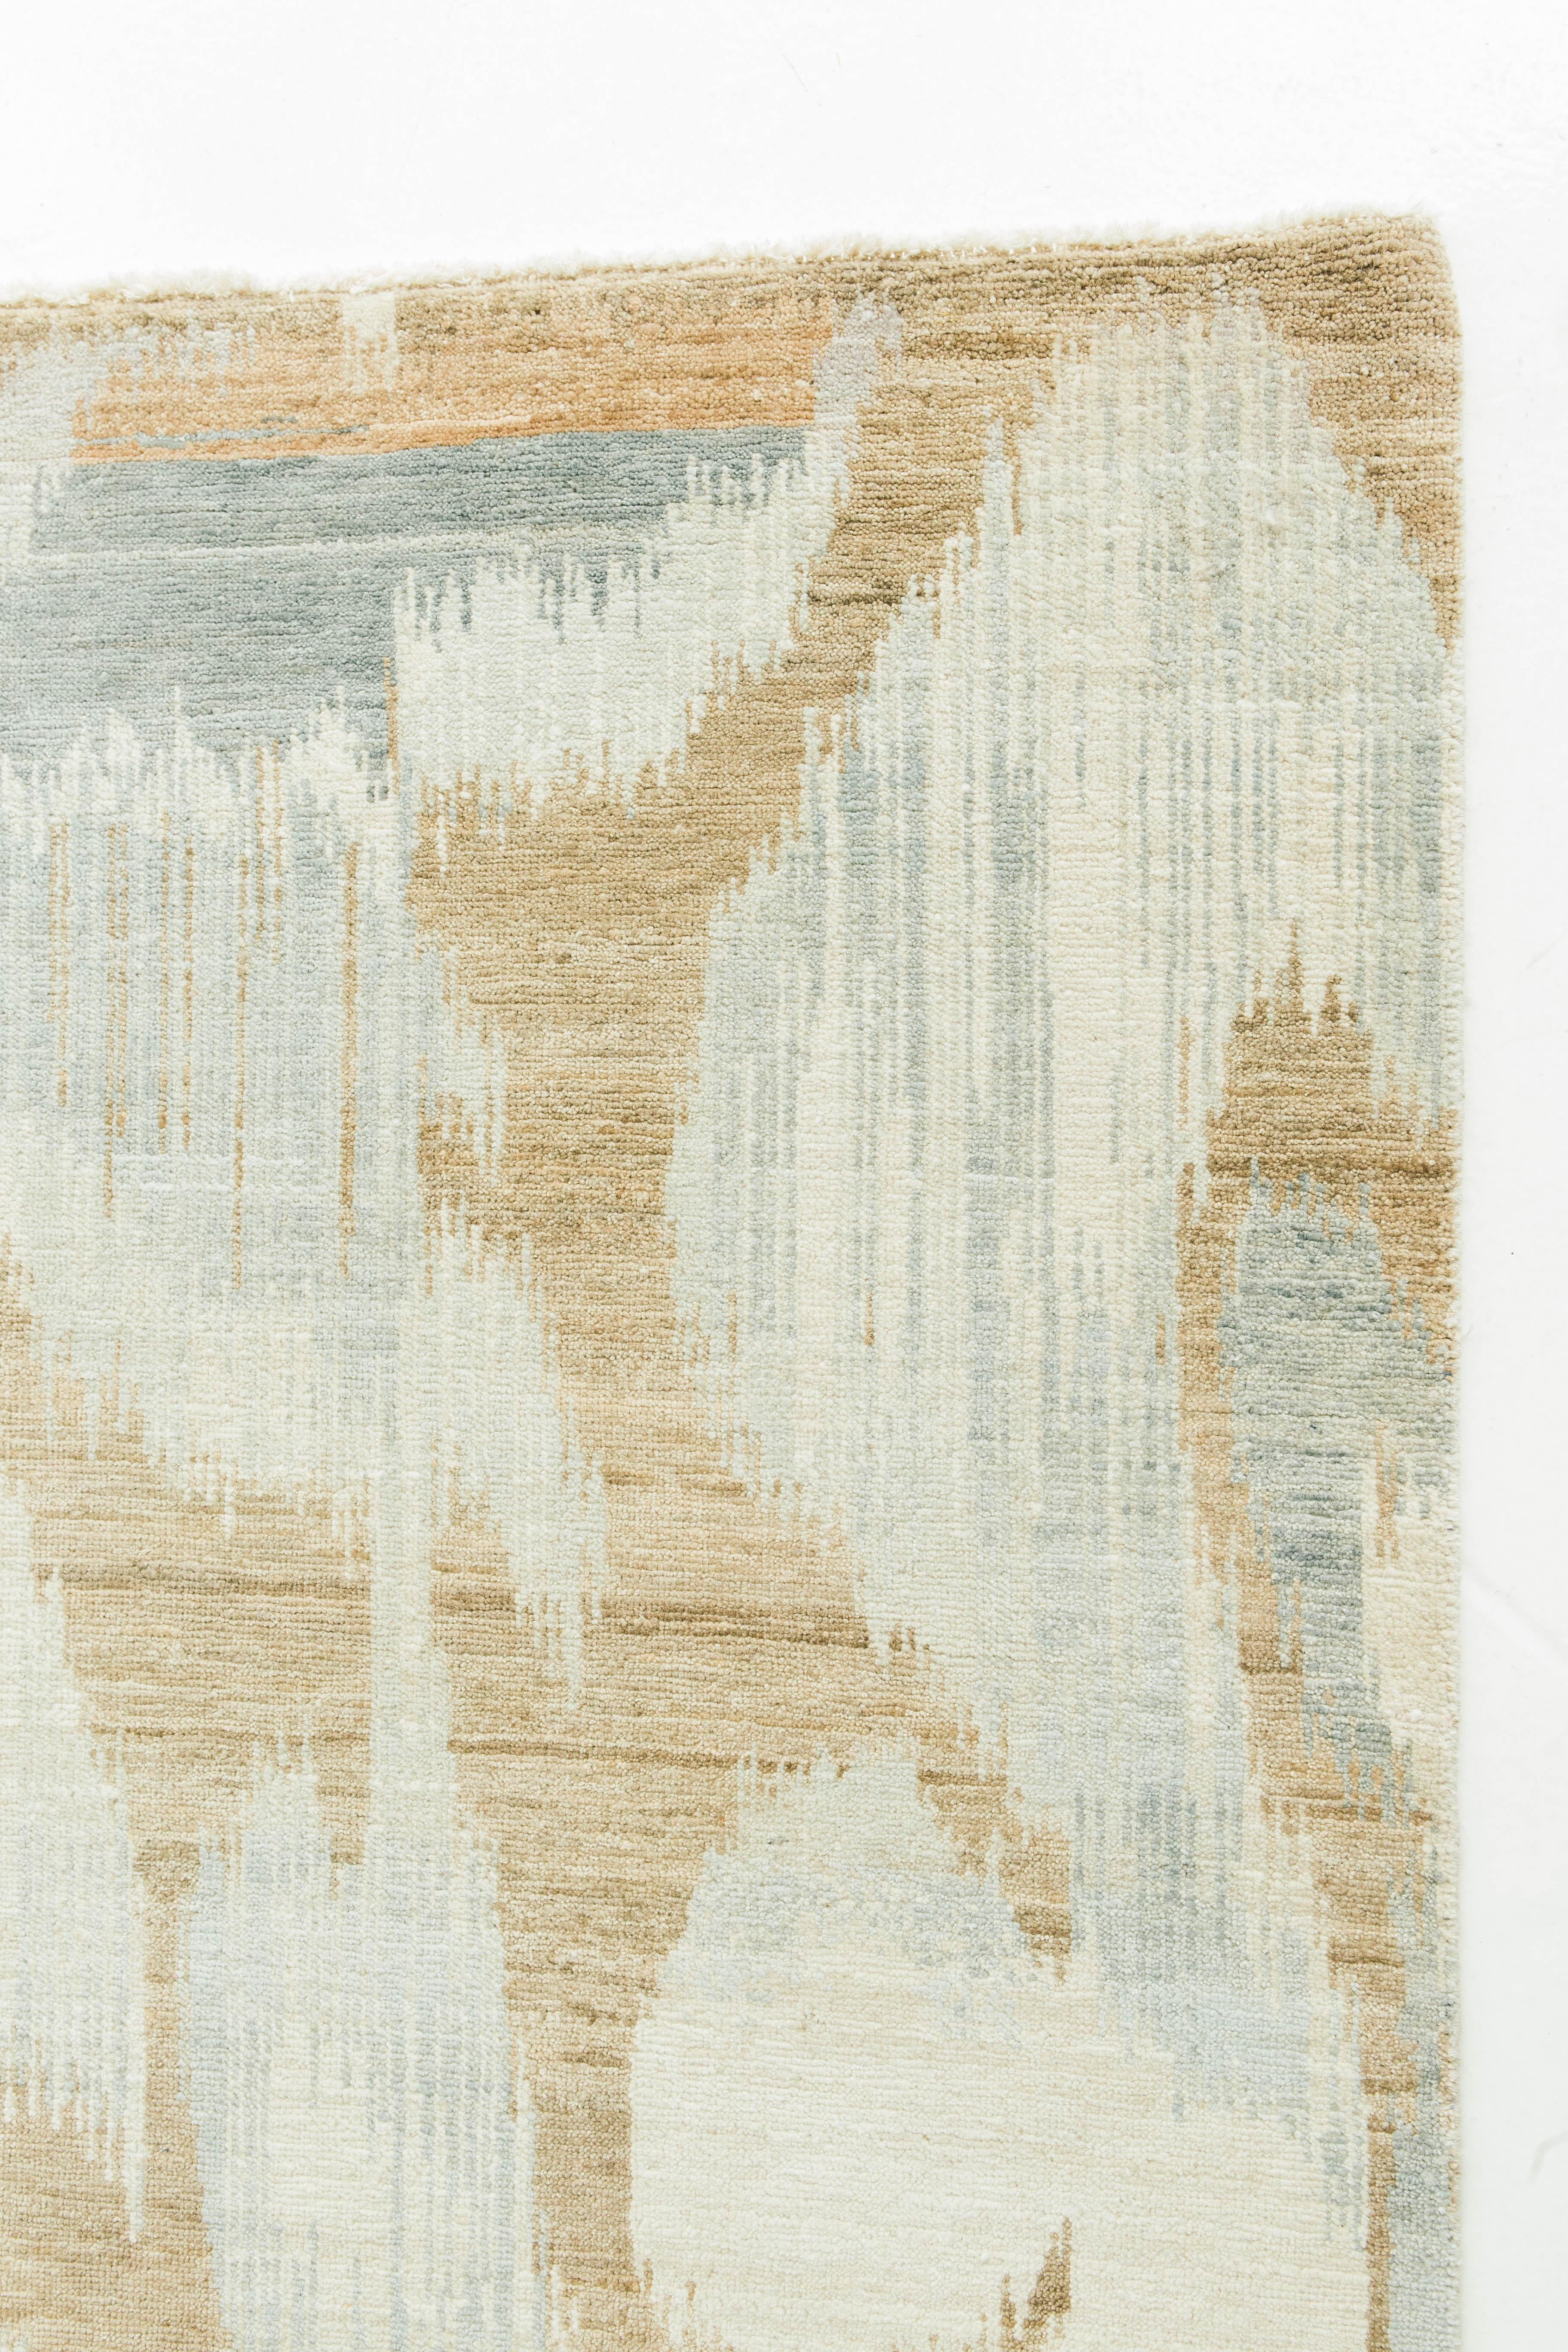 'Berja' is a beautiful magnified Ikat design rug in ivory, golden-taupe, and gray blues. The colors work cohesively to bring about a calm yet invigorating design. Ikat designs are globally inspired for today's modern design world.


Rug Number